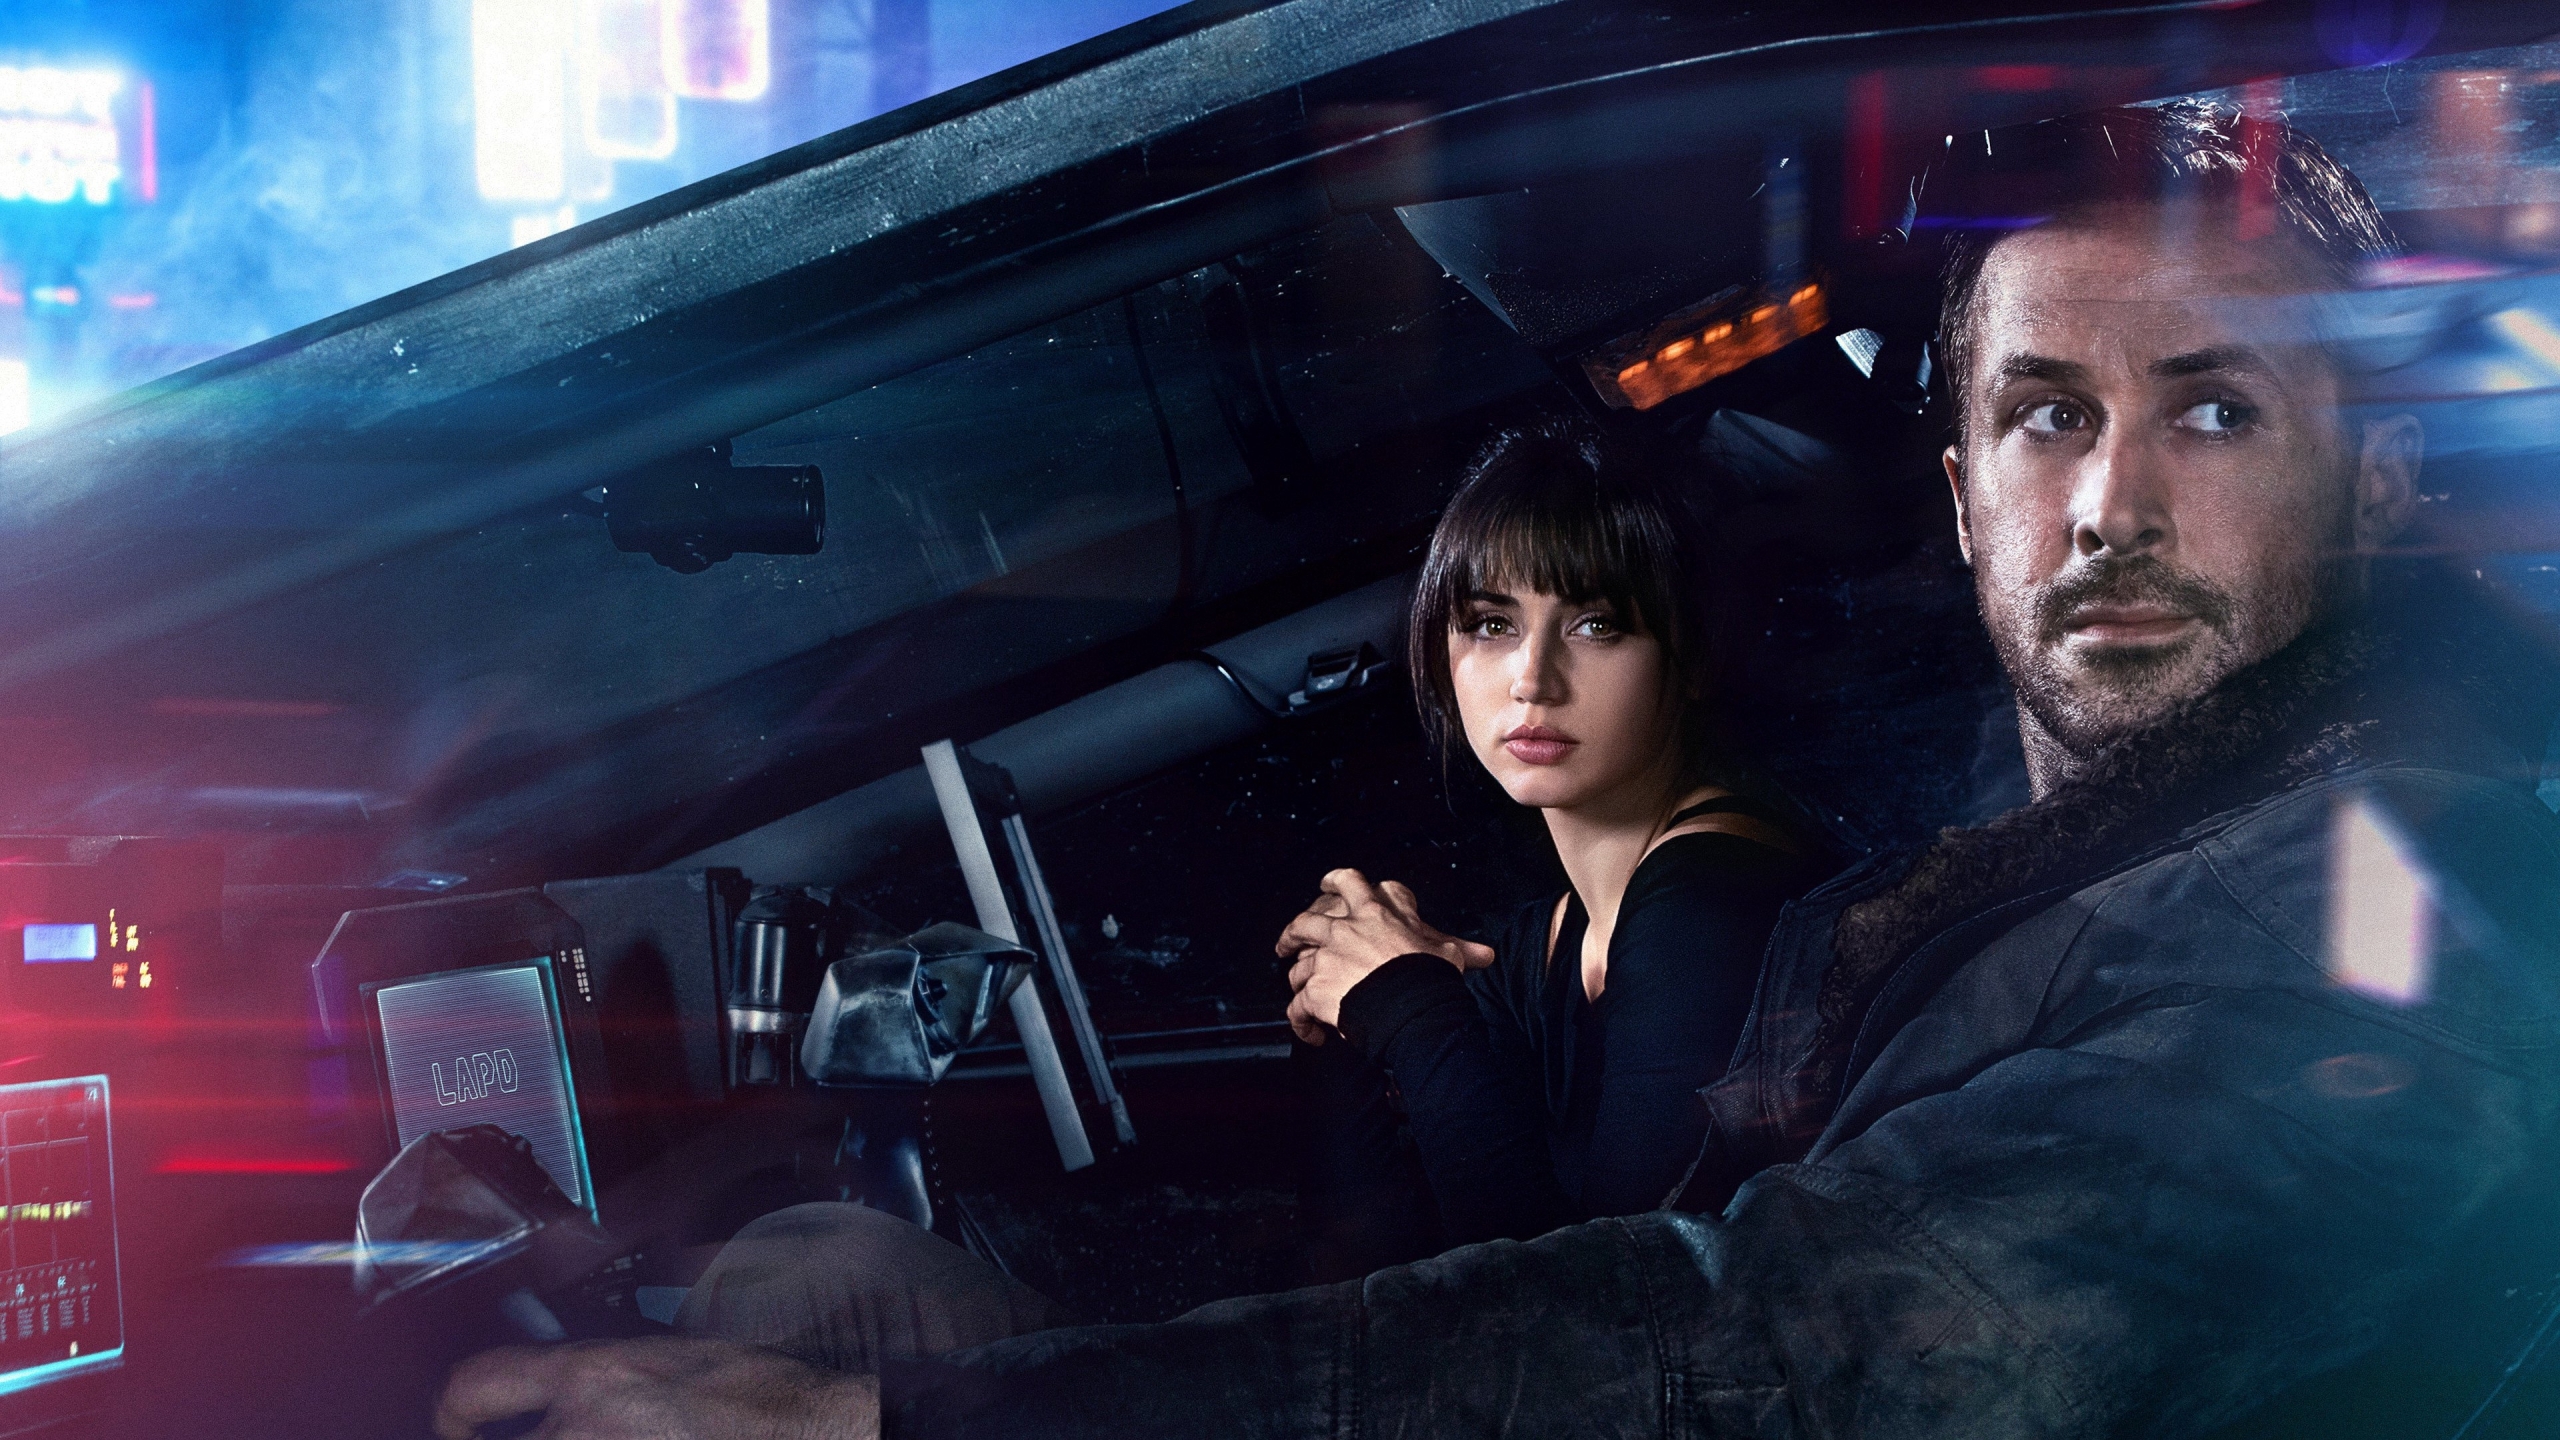 2560x1440 Blade Runner 2049 Ana De Armas Ryan Gosling 1440p Resolution Wallpaper Hd Movies 4k Wallpapers Images Photos And Background